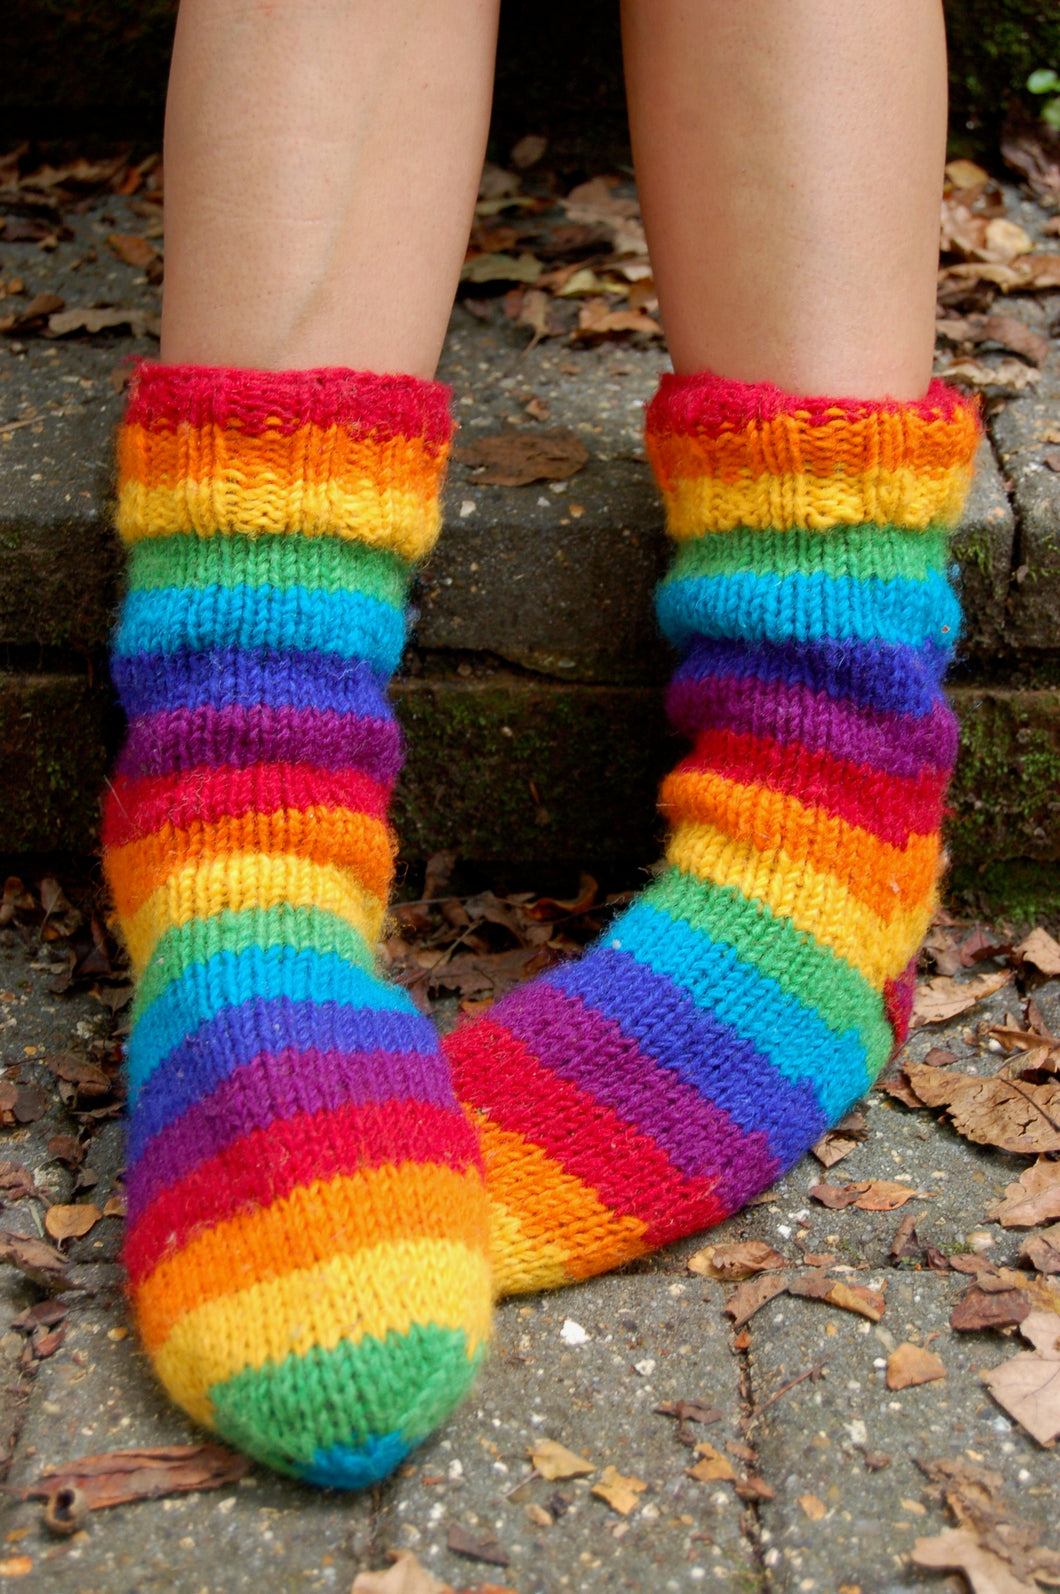 New! Buy now from Emma's Emporium online shop. Super bright, colourful and warm rainbow stripe wooden fleece lined Nepalese socks; the perfect winter warming Christmas gift!